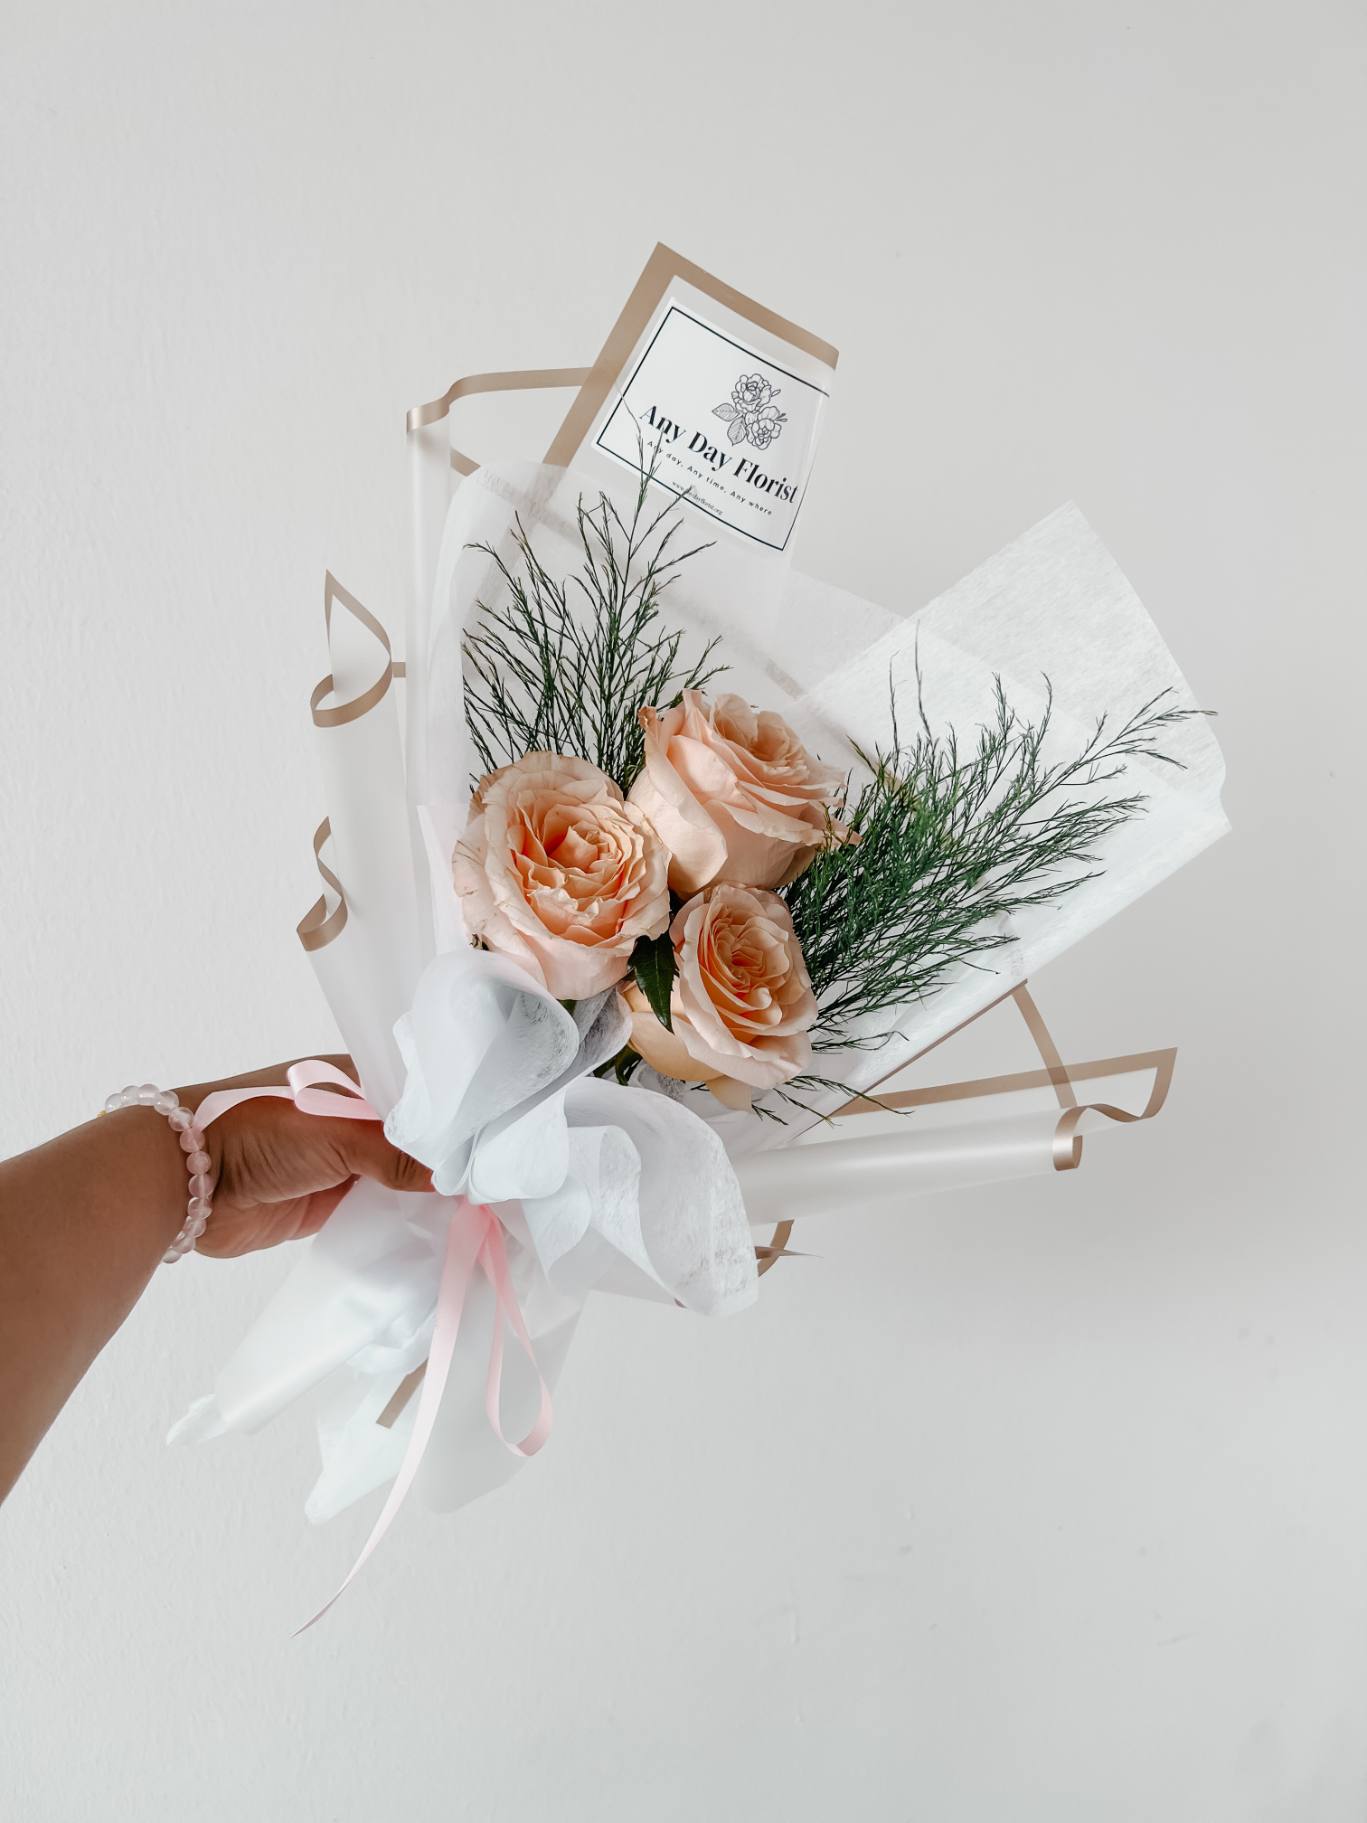 Any Day Florist
Buttercup Shimmer Roses are the most beautiful roses in the world!  If you're looking for the perfect way to show your love, look no further than Buttercup Shimmer Buttercup | Shimmer Roses